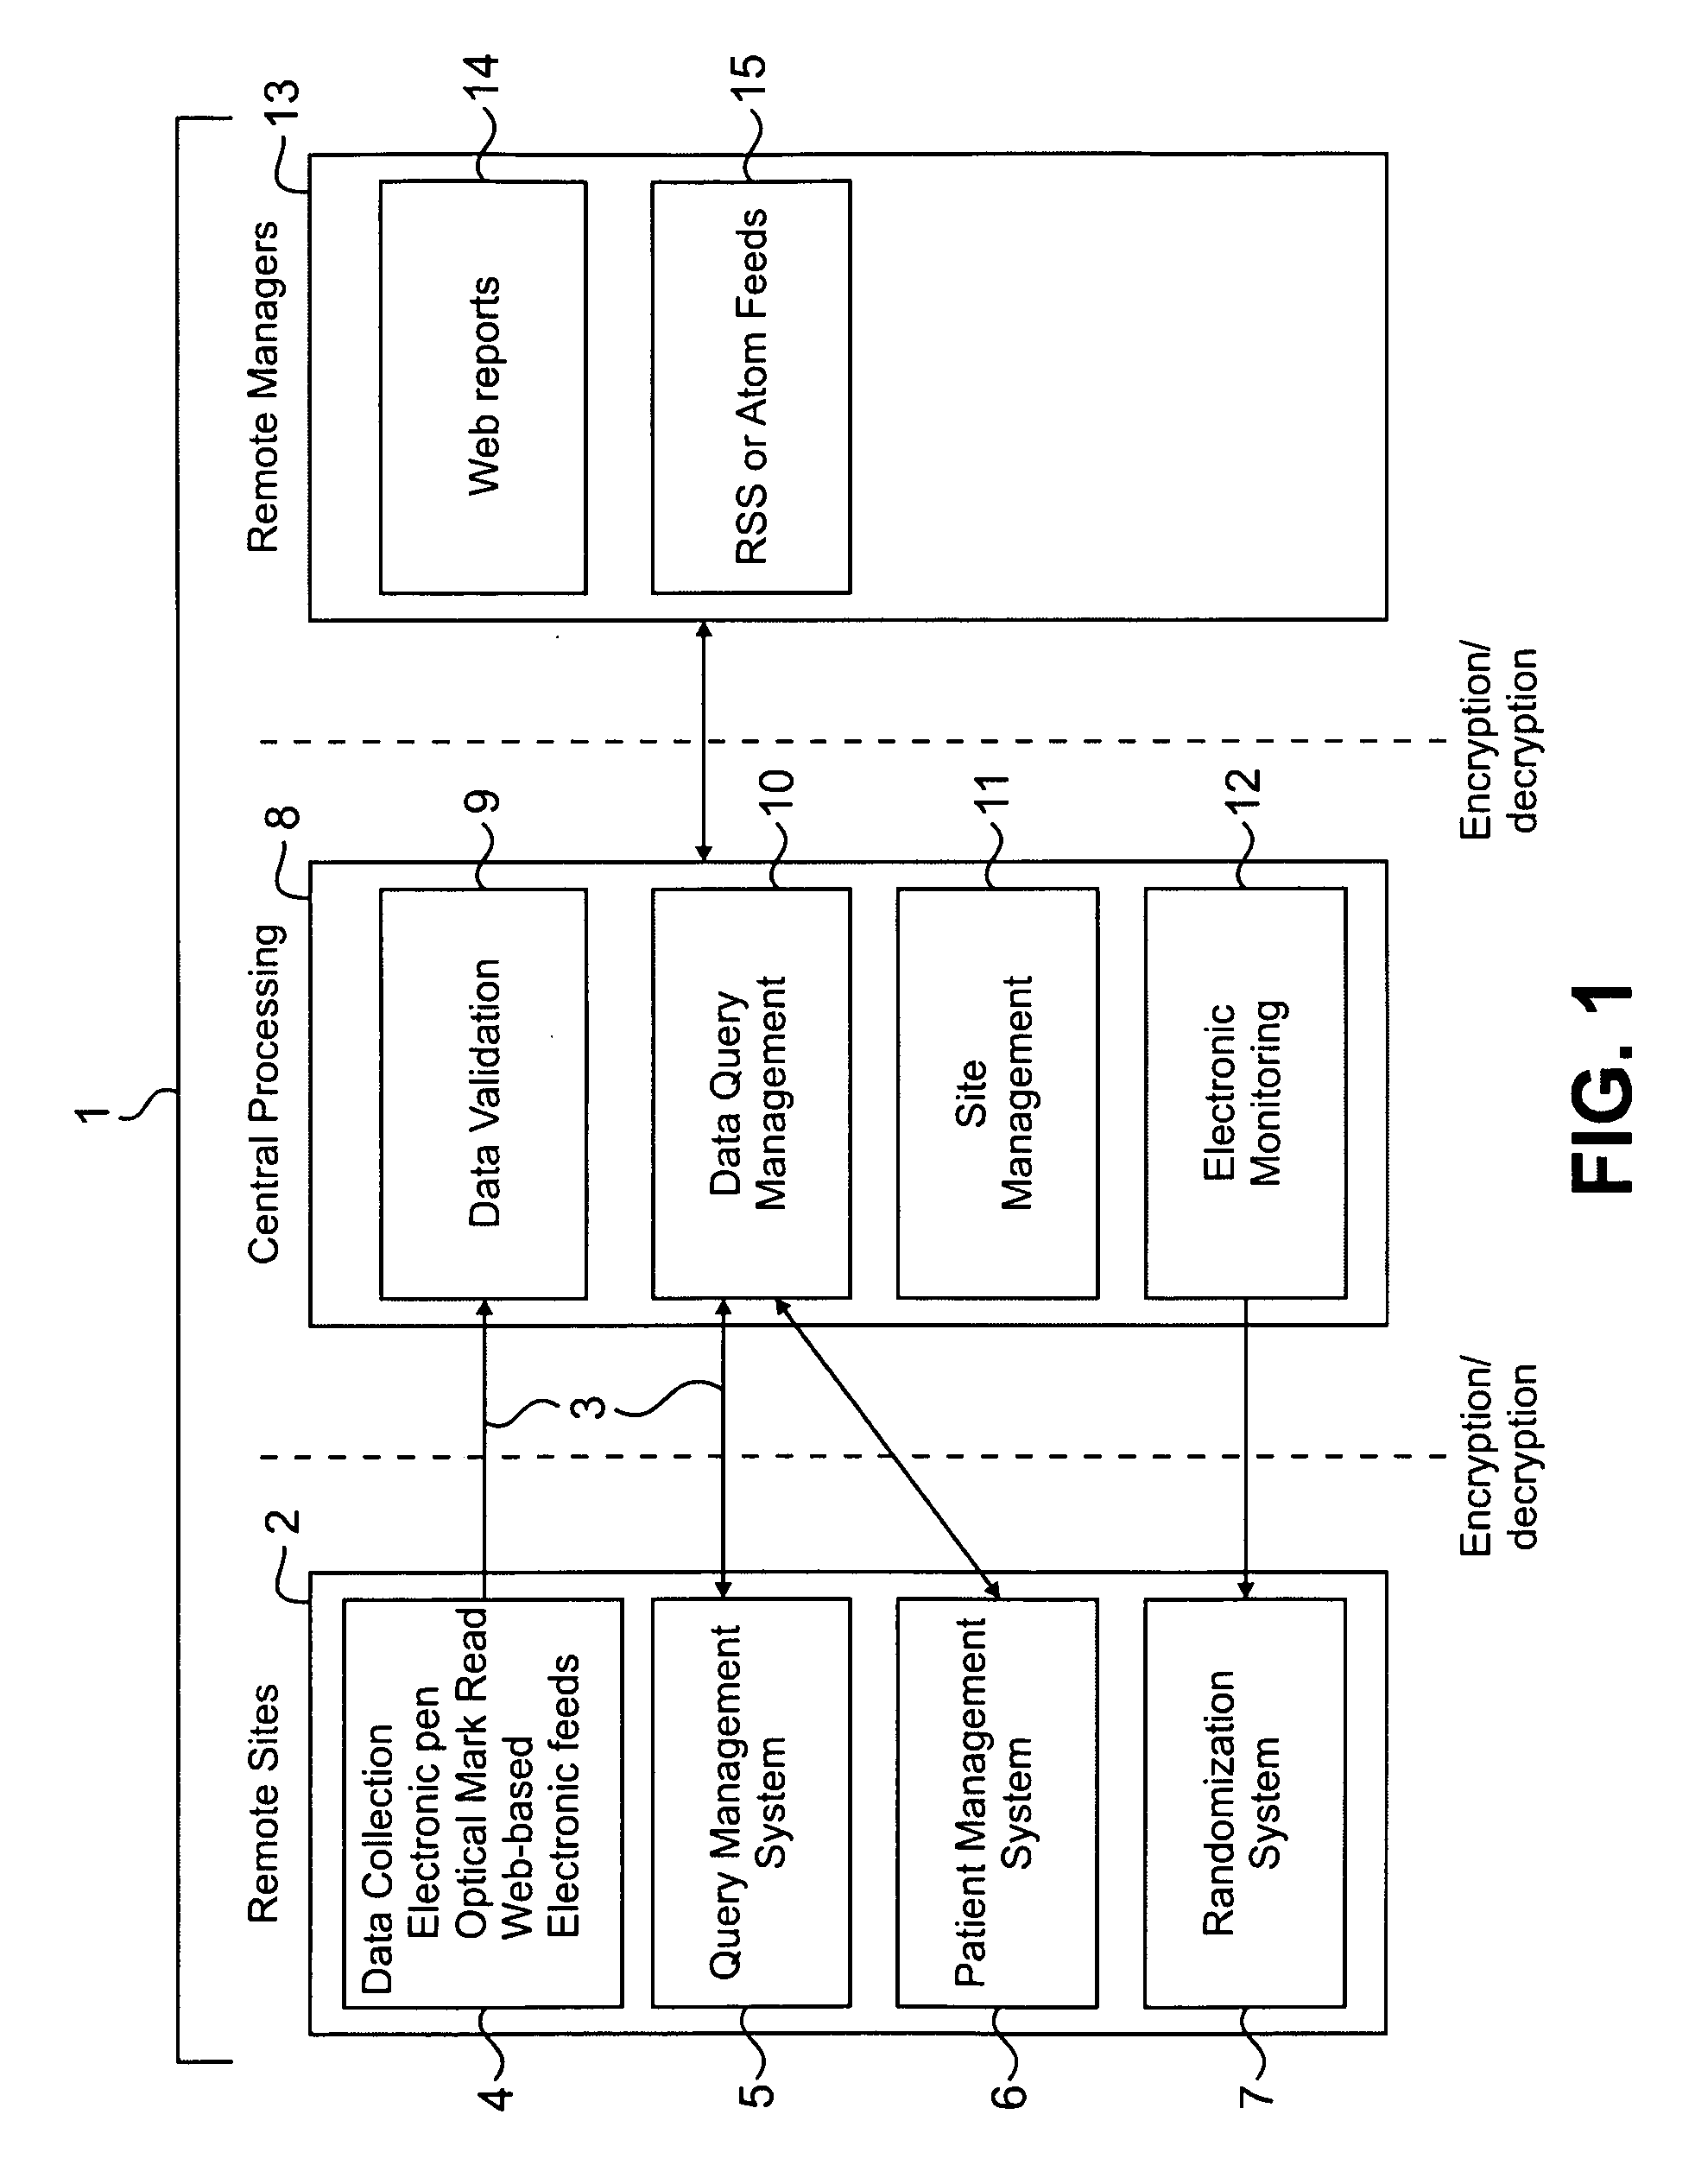 Method and system for collection, validation, and reporting of data and meta-data in conducting adaptive clinical trials